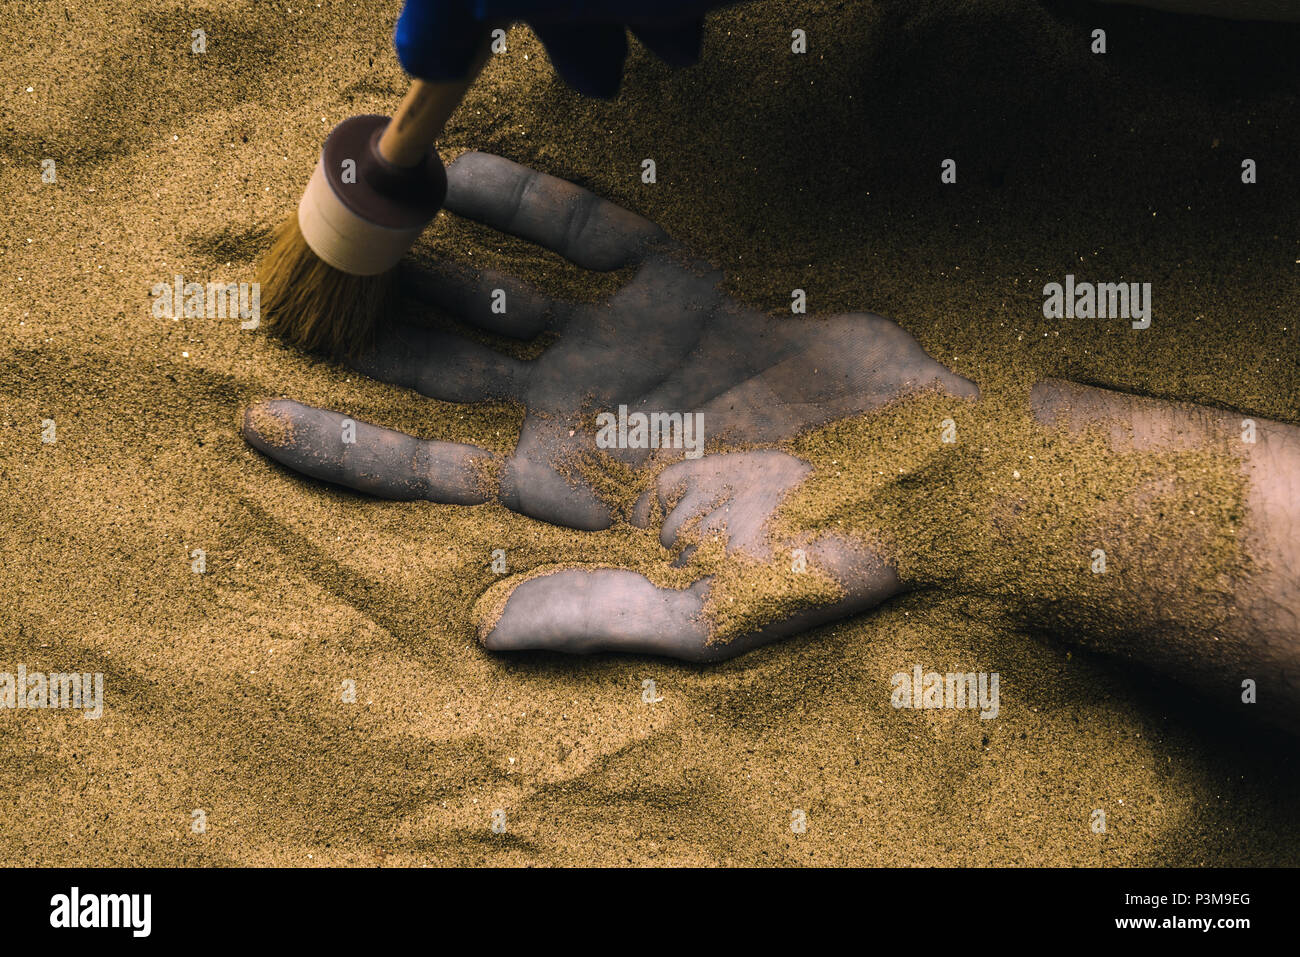 Forensic expert discovering dead body buried in desert sand. Conceptual image for police investigation of an cold case murder crime scene. Stock Photo